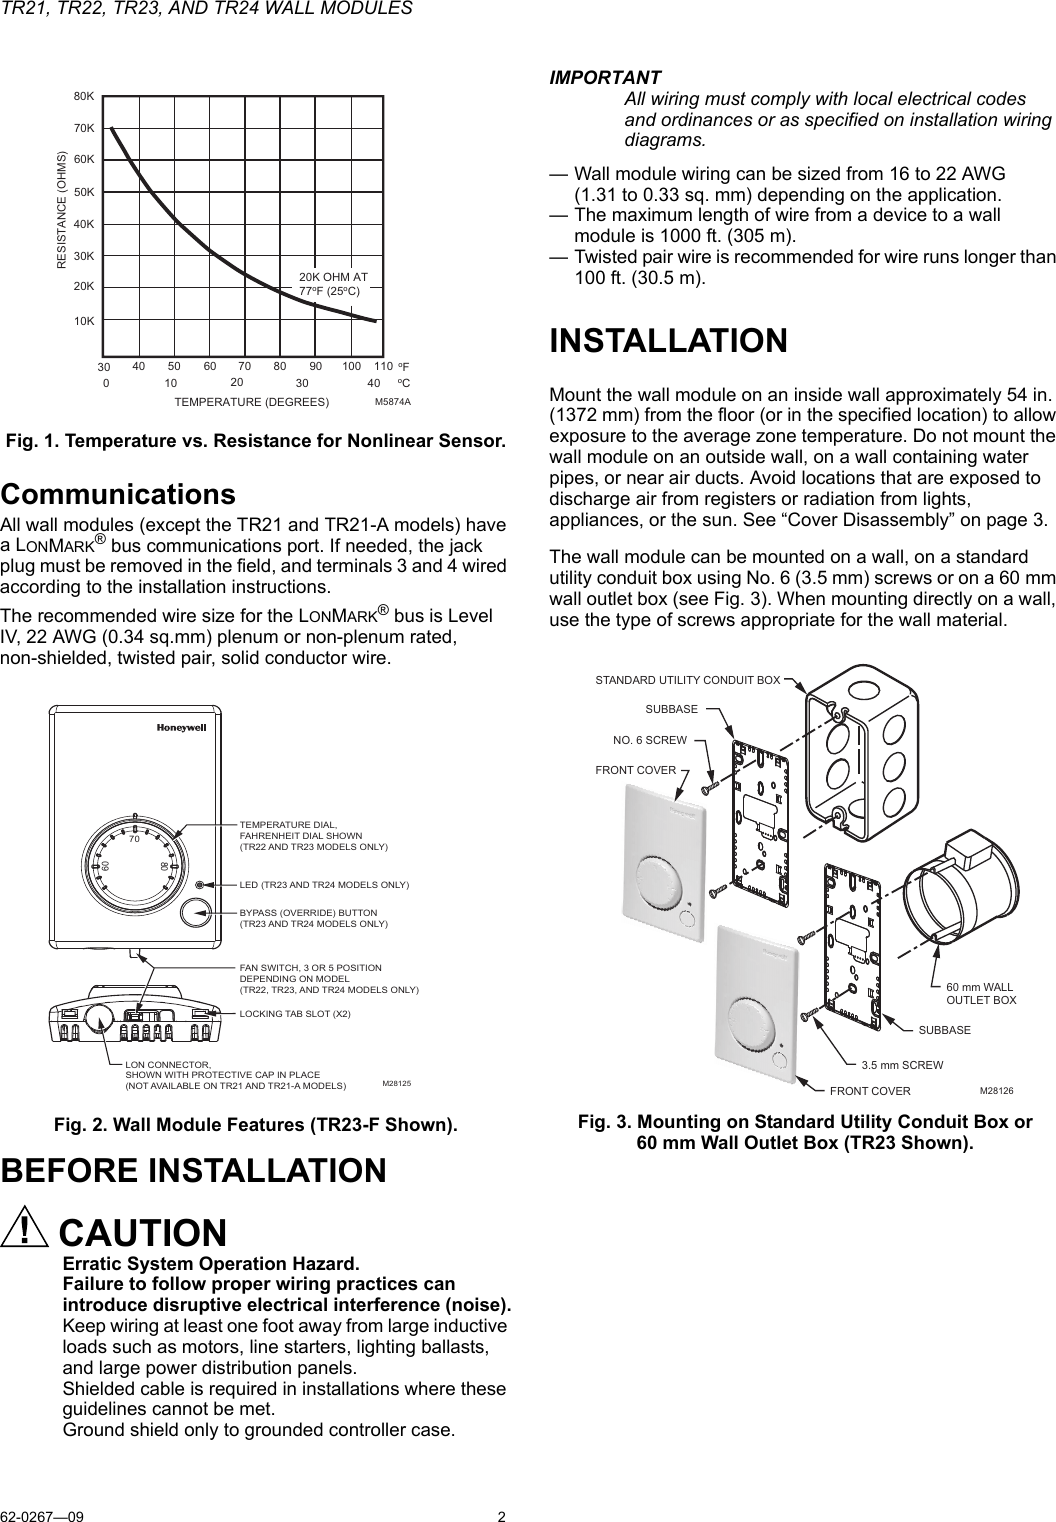 Page 2 of 8 - Honeywell Honeywell-Honeywell-Tv-Mount-Tr21-Users-Manual- 62-0267_E TR21, TR22, TR23, And TR24 Wall Modules  Honeywell-honeywell-tv-mount-tr21-users-manual